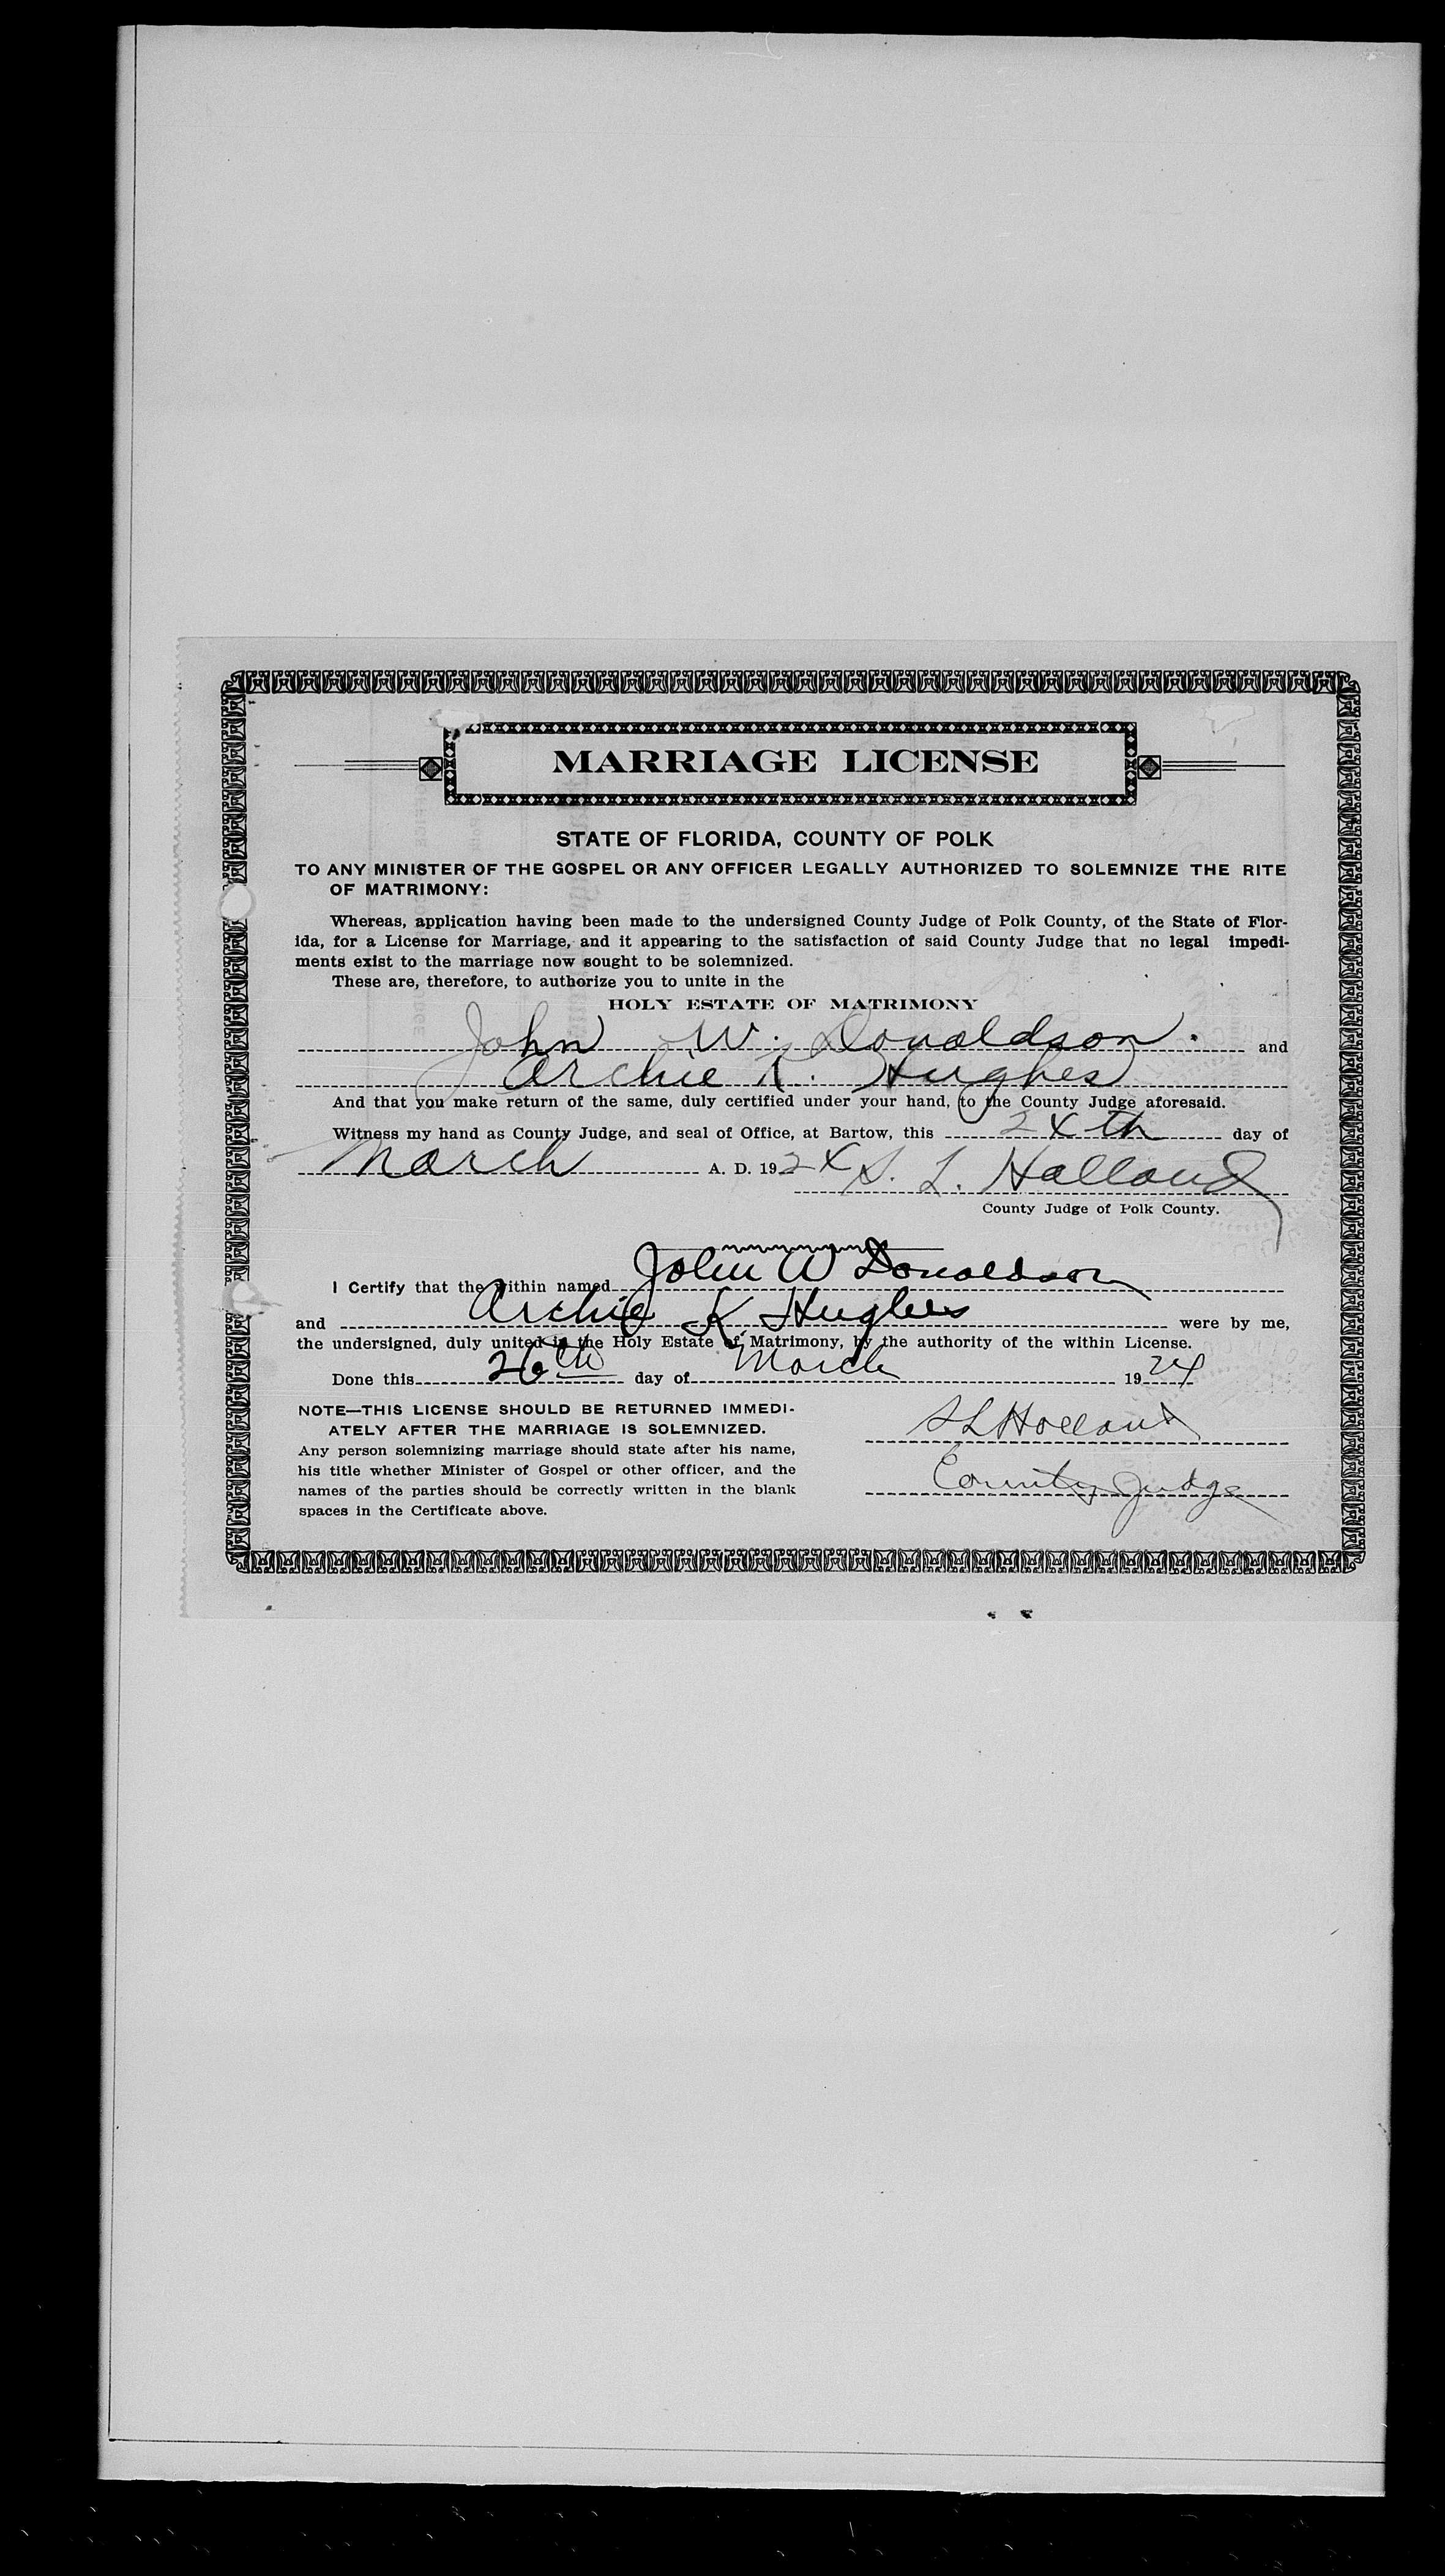 Donaldsons first marriage license 